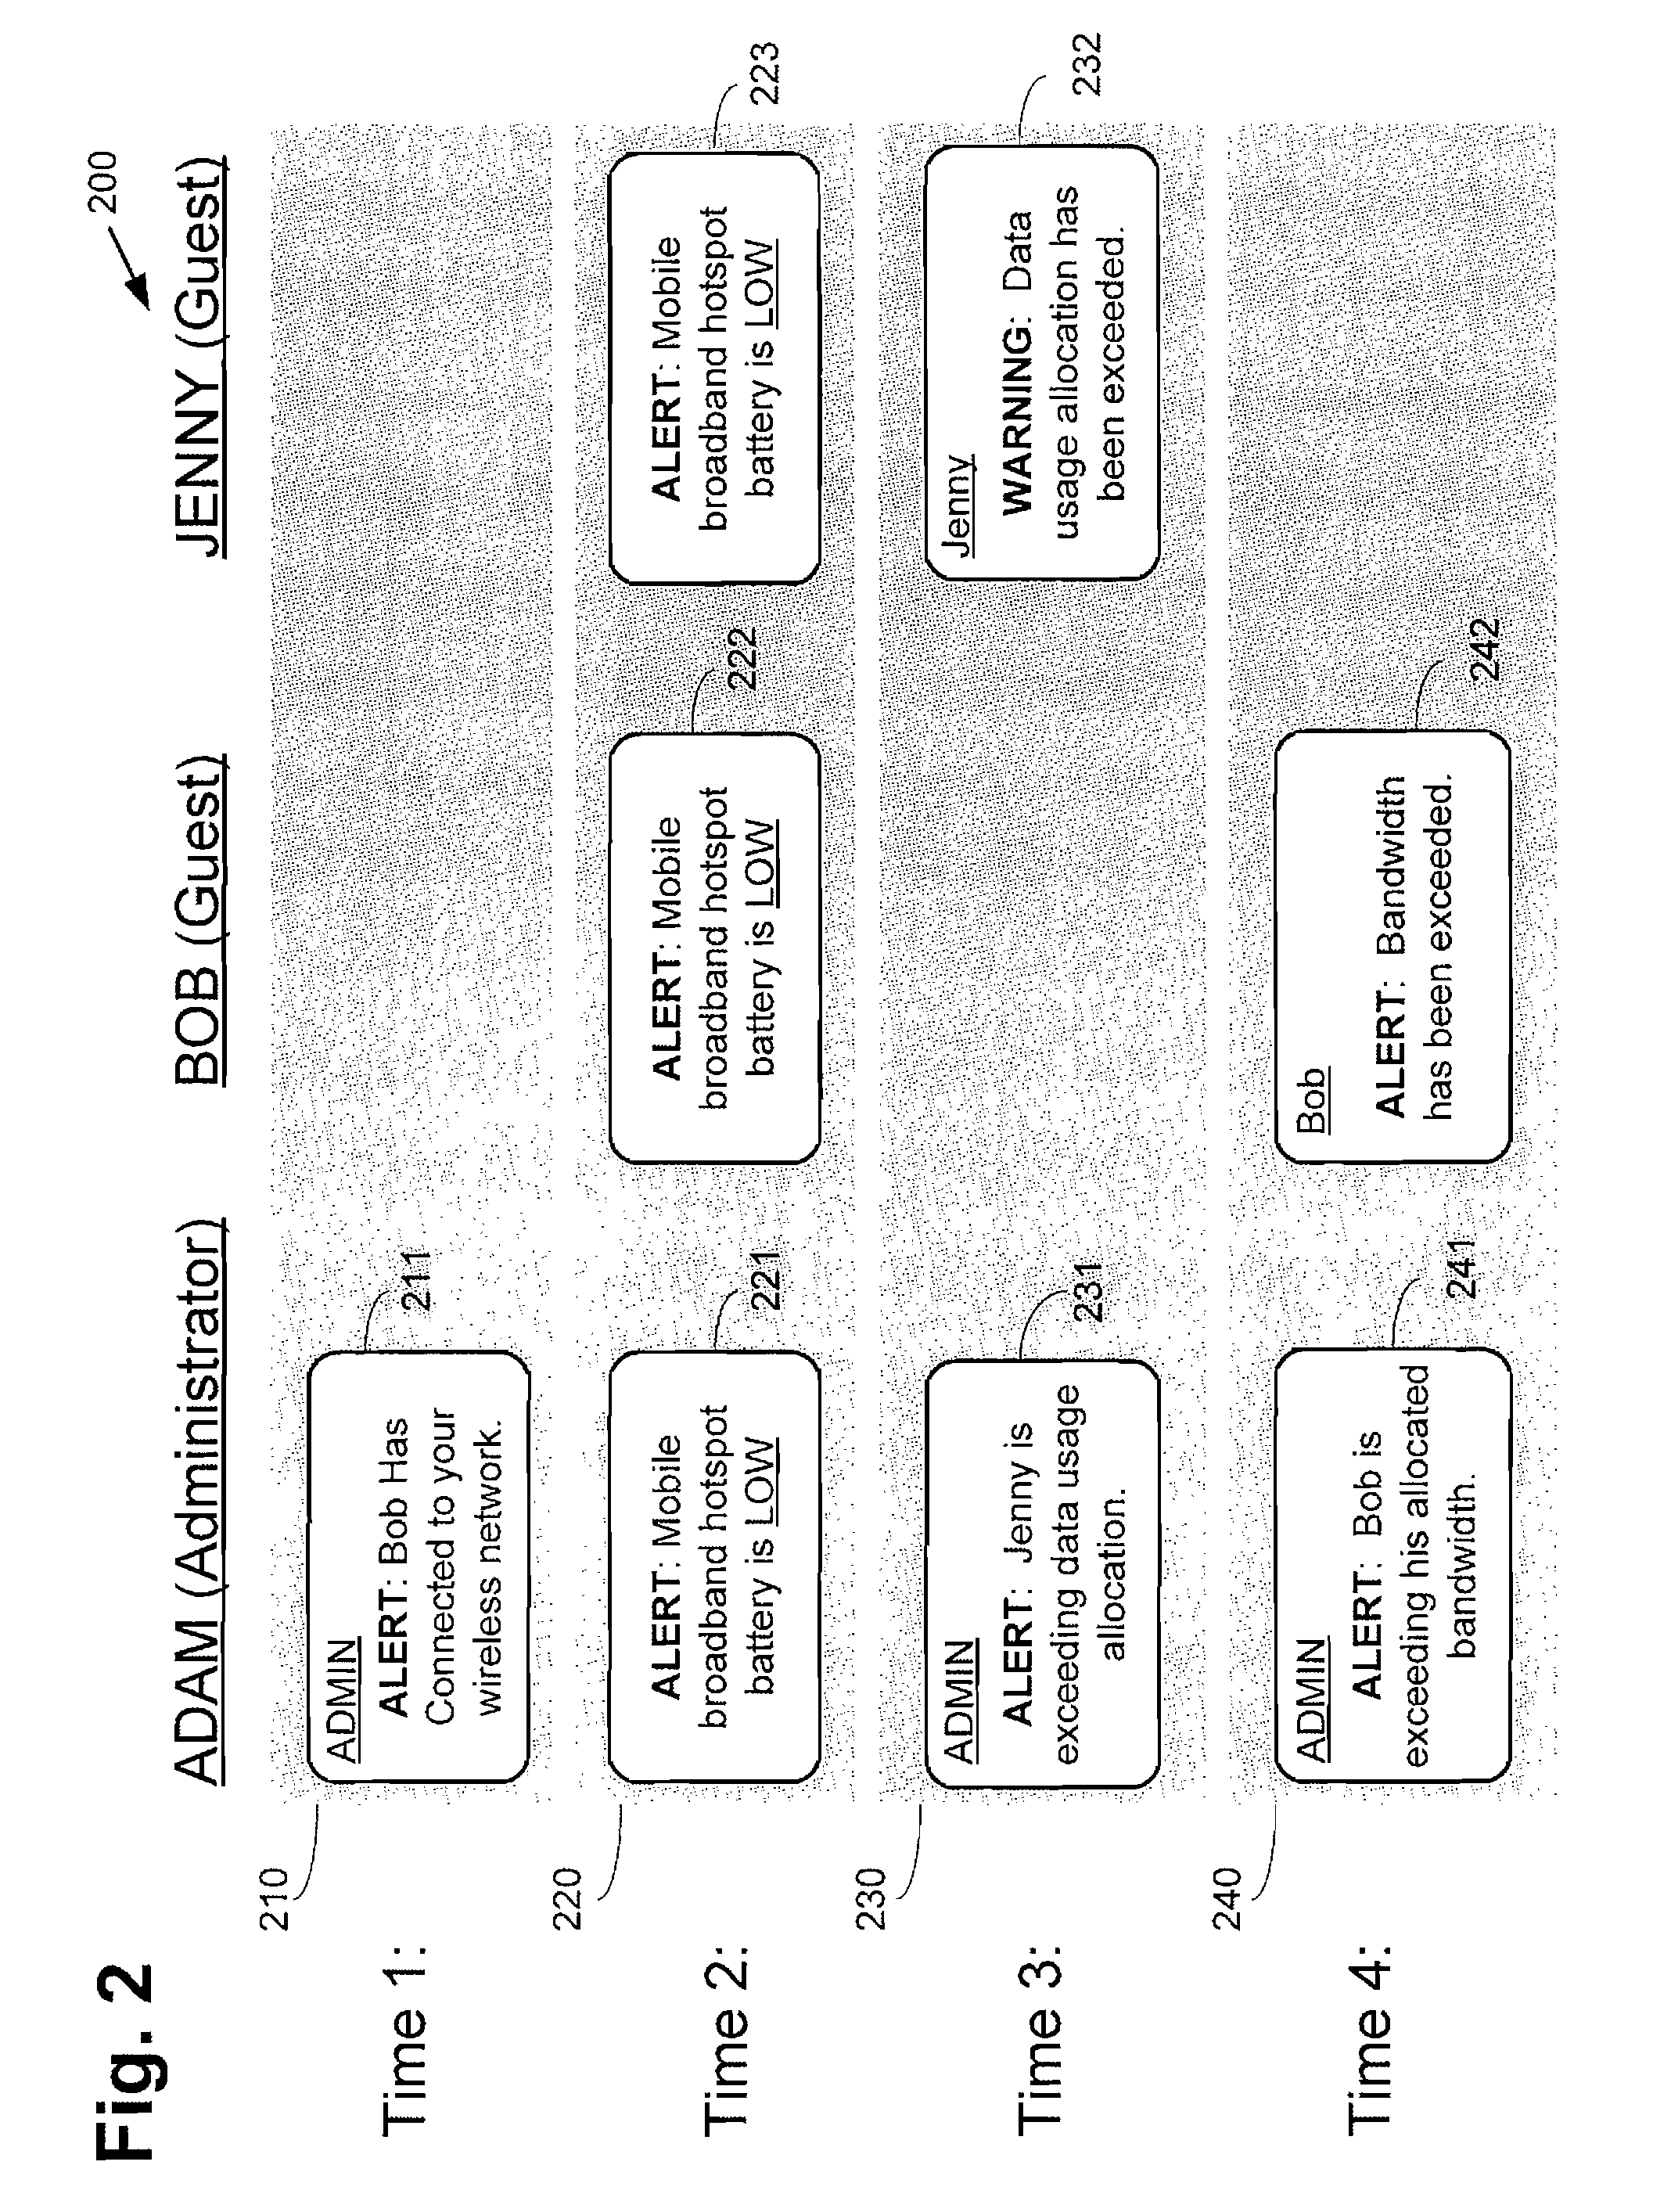 System and Method for Managing Billing for Hotspot Network Access